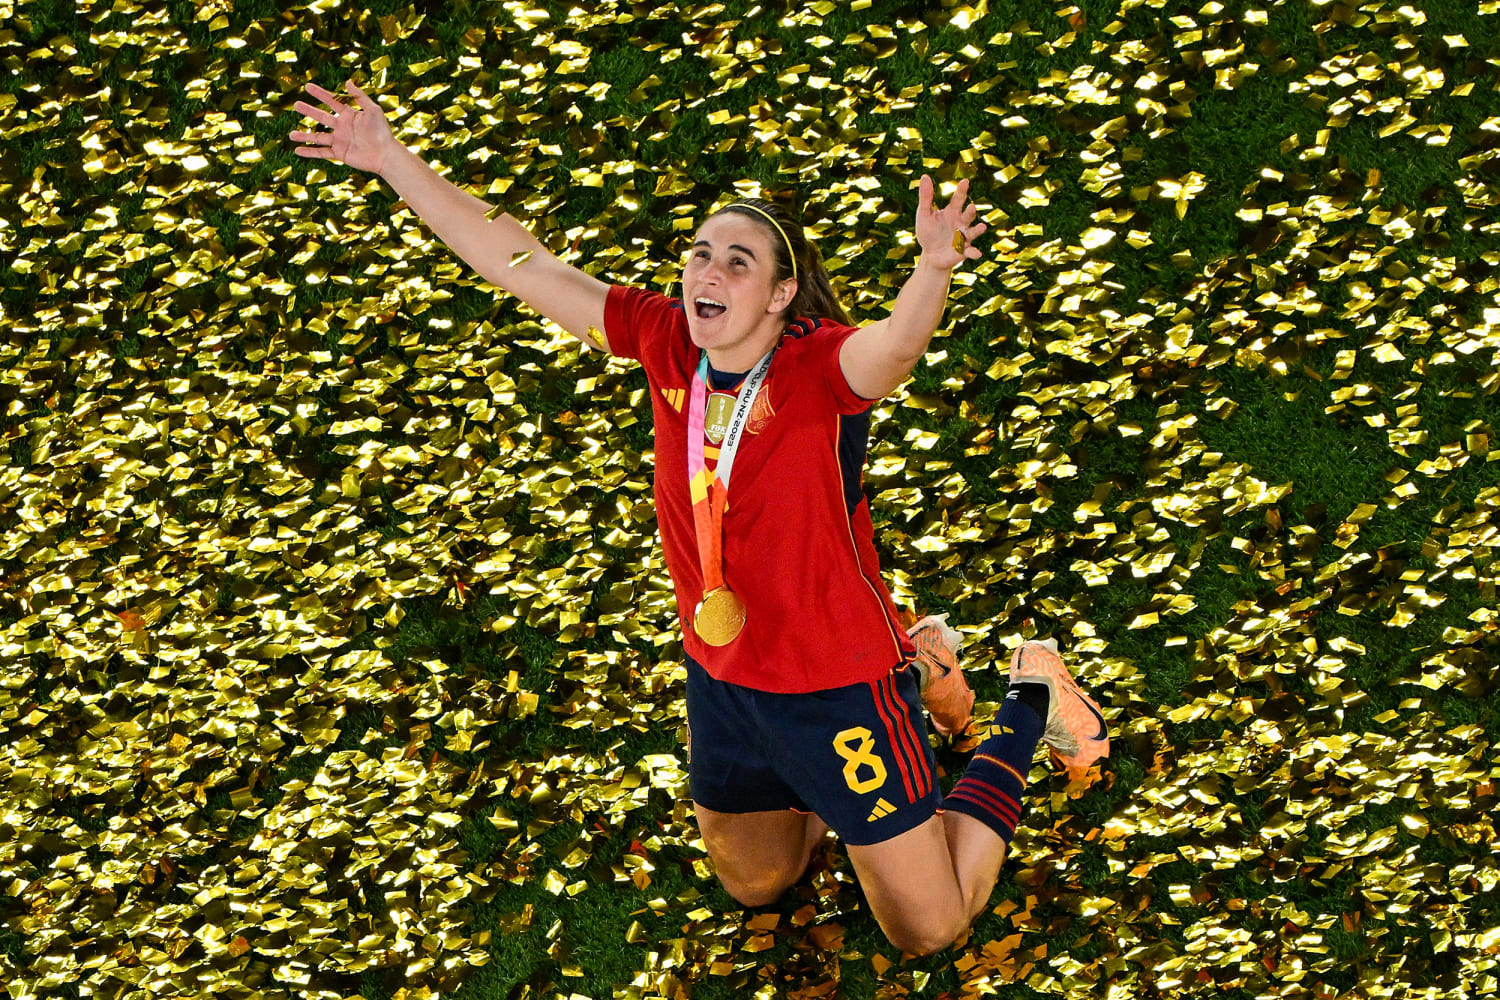 Spain win historic FIFA Women's World Cup final against England